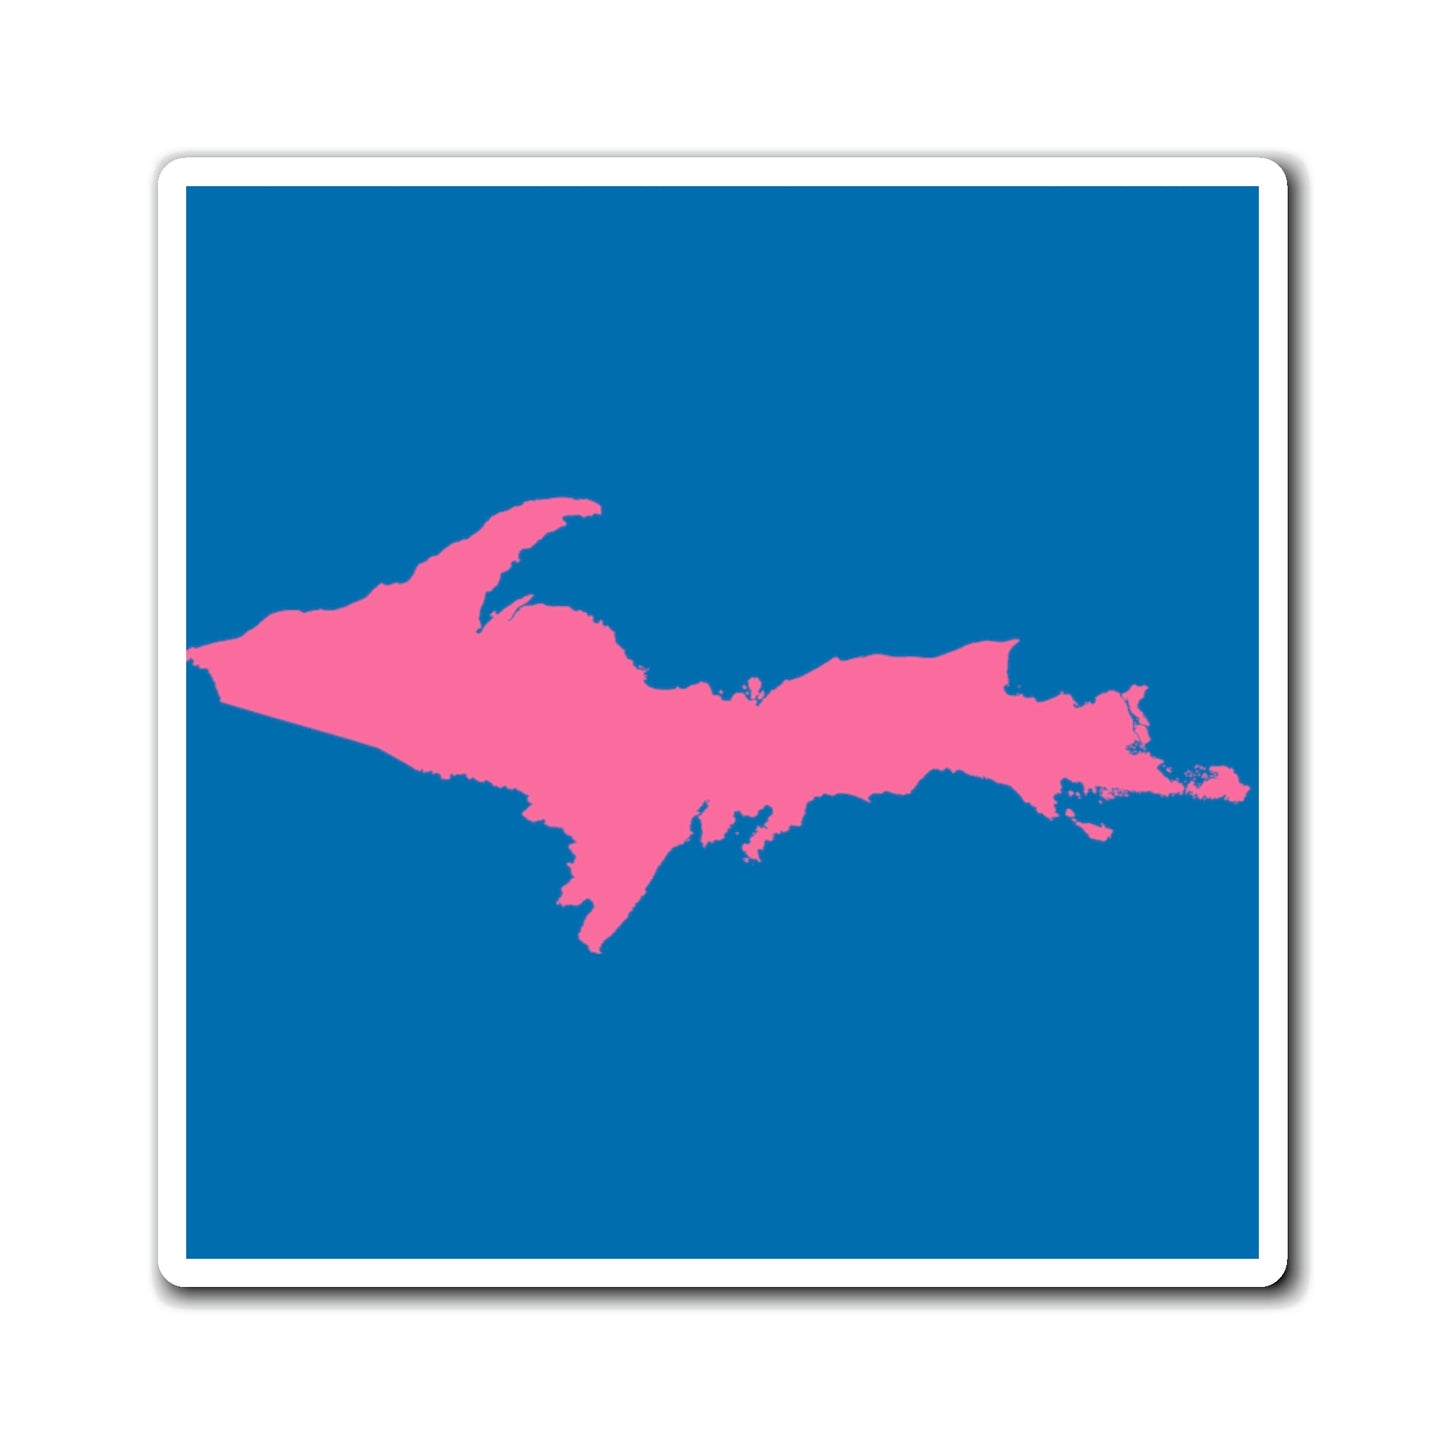 Michigan Upper Peninsula Square Magnet (w/ Pink UP Outline)